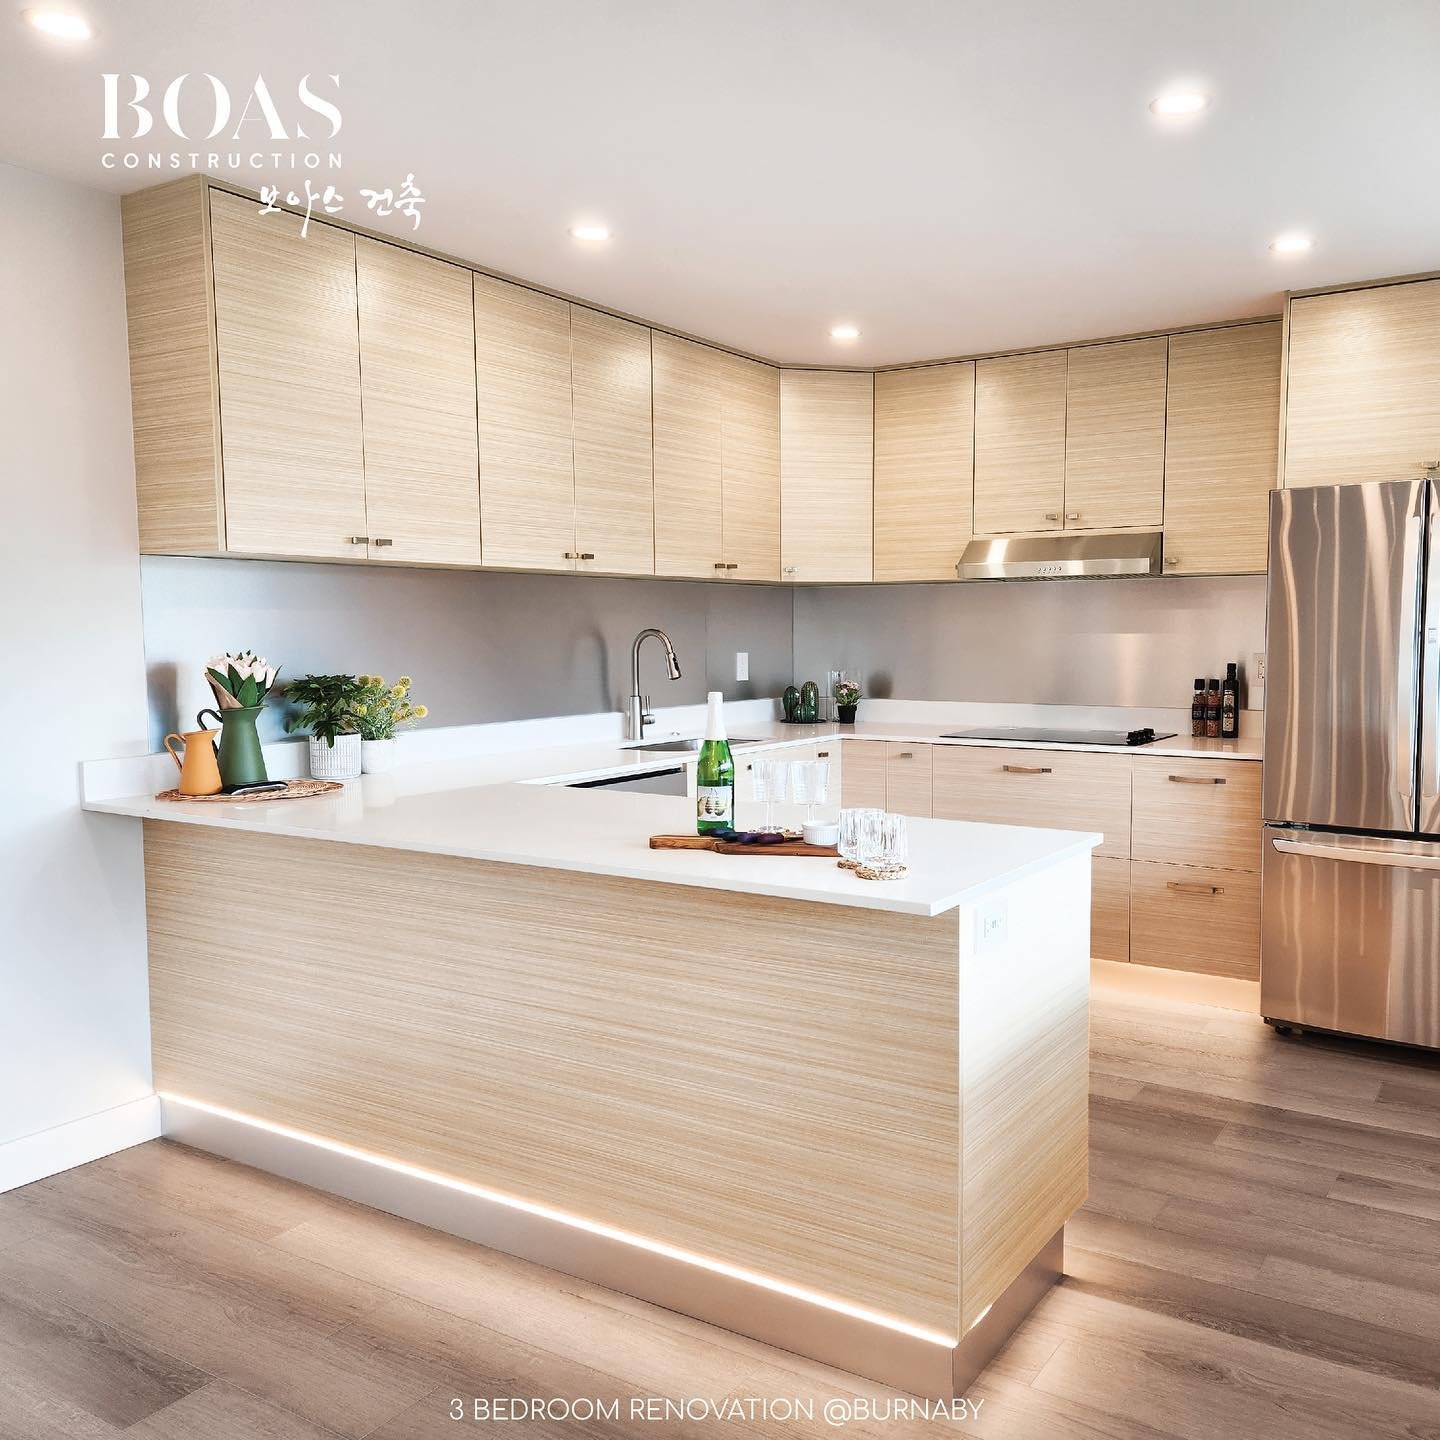 Burnaby Residential Project : 3bedroom 1,316 sf
.
.
.
#constructionvancouver #construction #architecture #architect #renovation #civil #civilengineering #interior #builder #contractor #home #residential #homedesign #customcabinet #cabinetmaking #mill